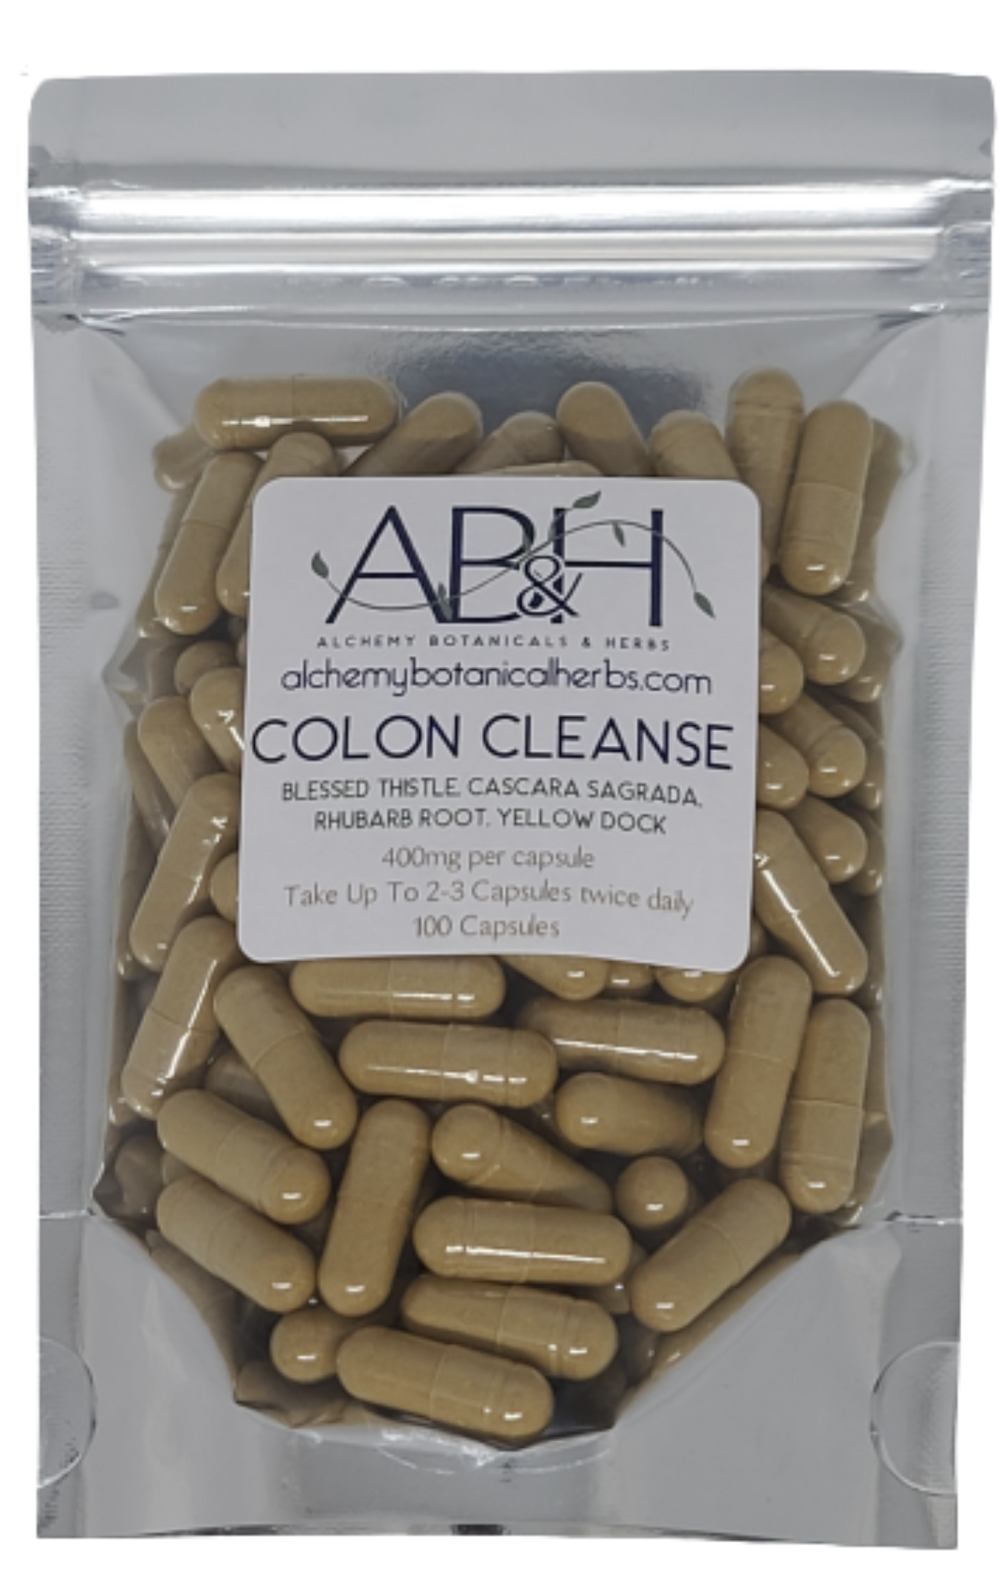 Colon Cleanse Blend Capsules 400mg 50 Capsules 100 Capsule Blessed Thistle, Cascara Sagrada, Rhubarb Root and Yellow Dock - Alchemy Botanicals & Herbs Corp